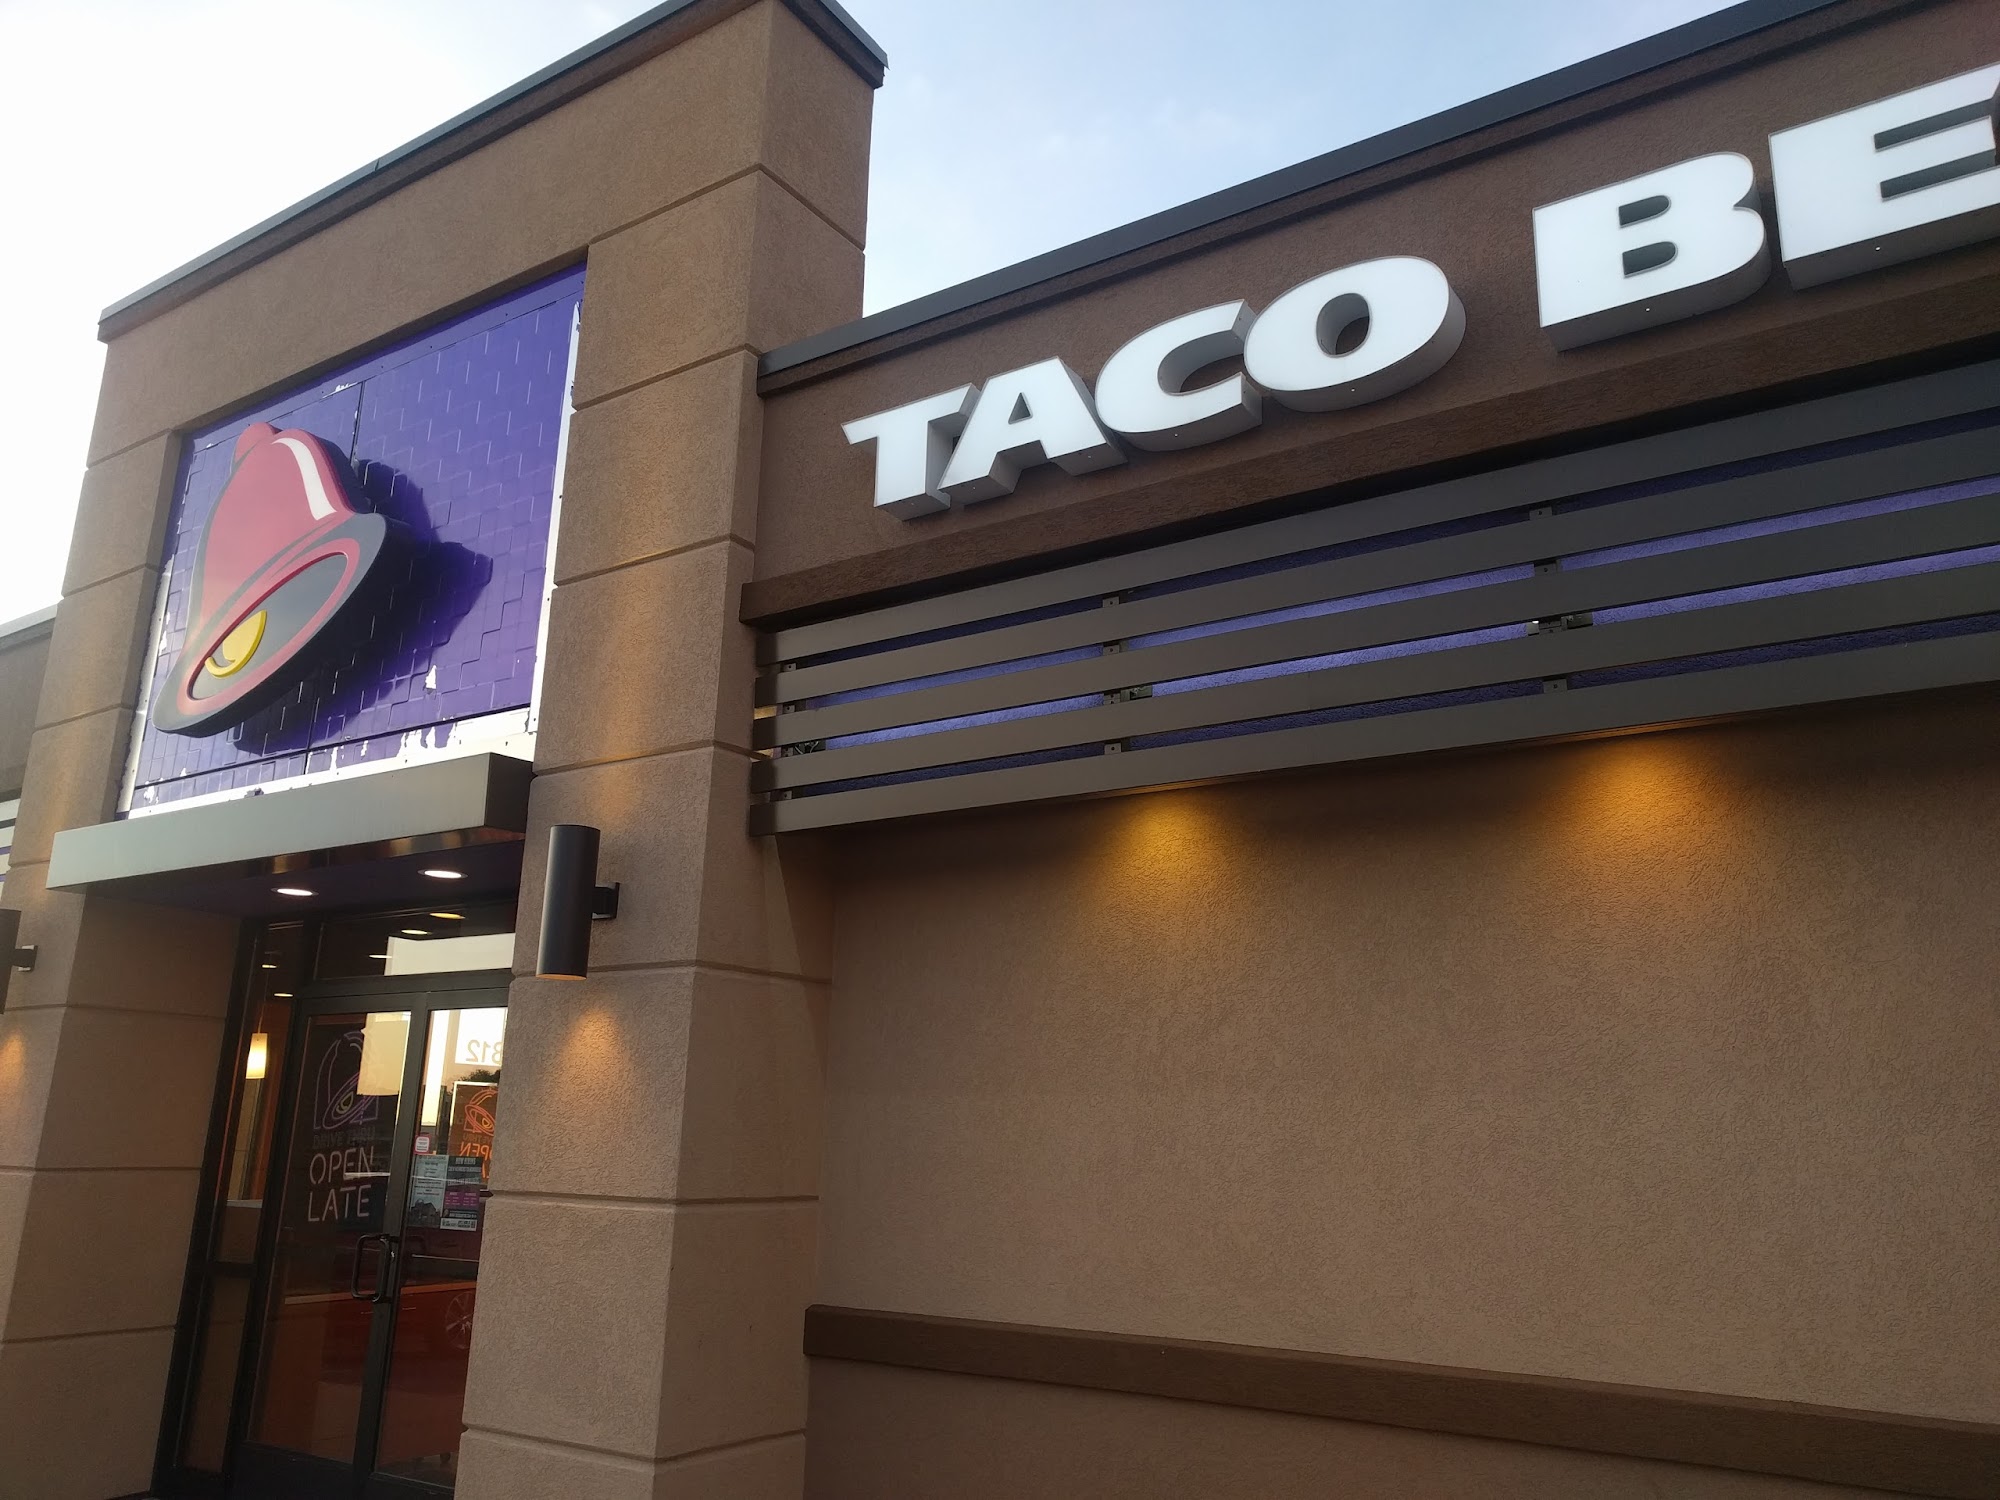 Taco Bell